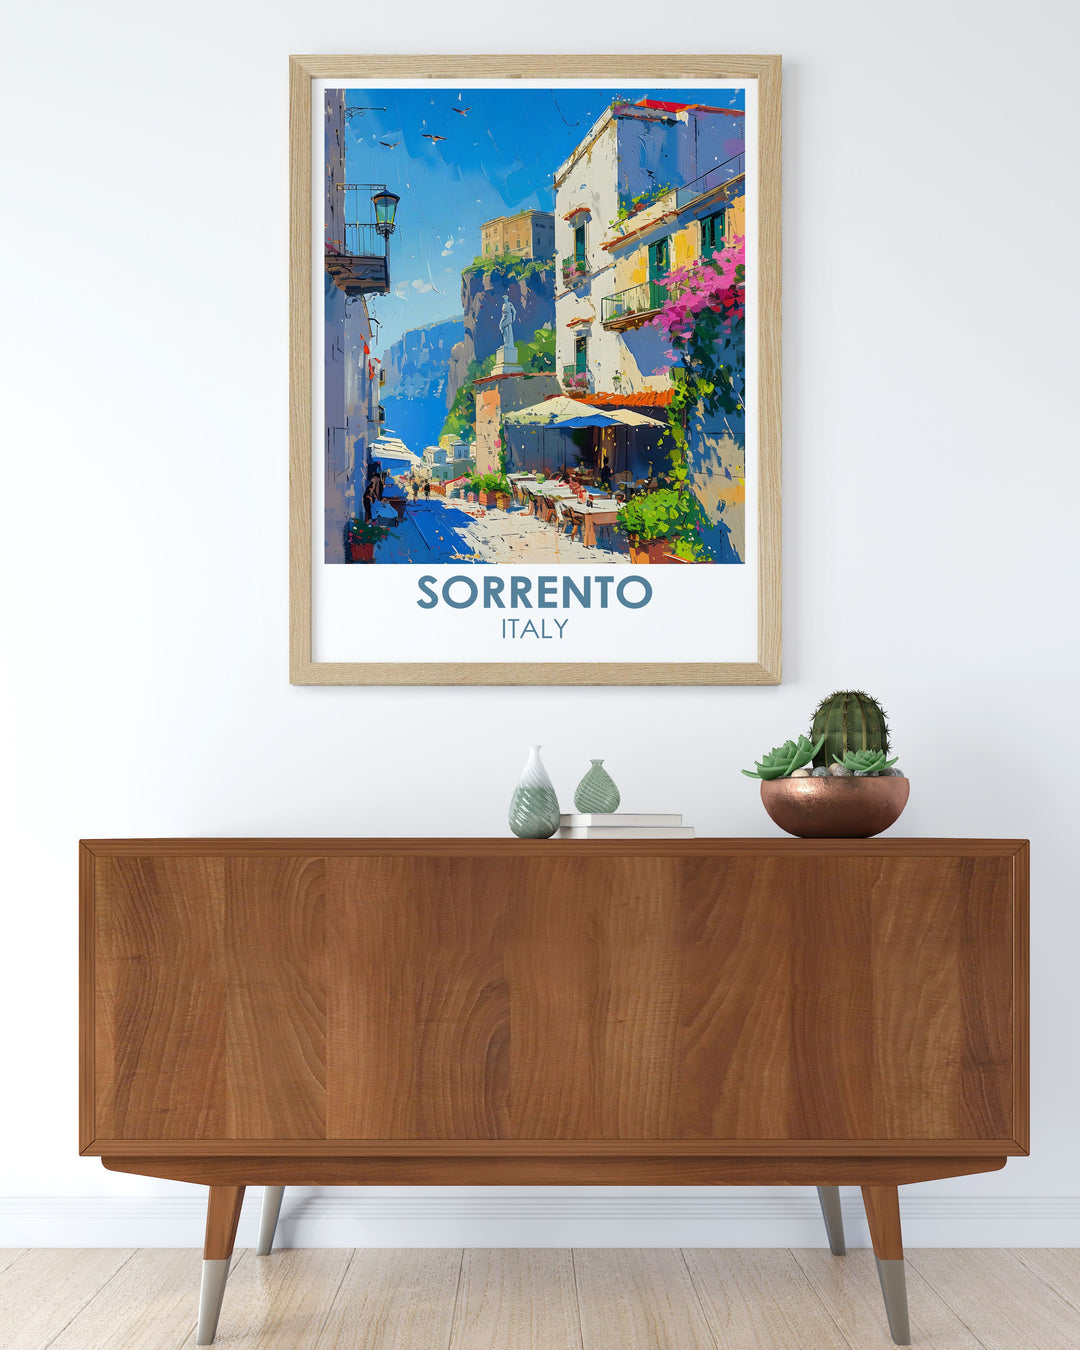 Italy travel print showcasing the lively ambiance of Sorrento Italy with Piaza Tasso and picturesque street life. Ideal for creating an inviting and artistic atmosphere in your living space this Sorrento art print is a stunning addition to any home decor collection.